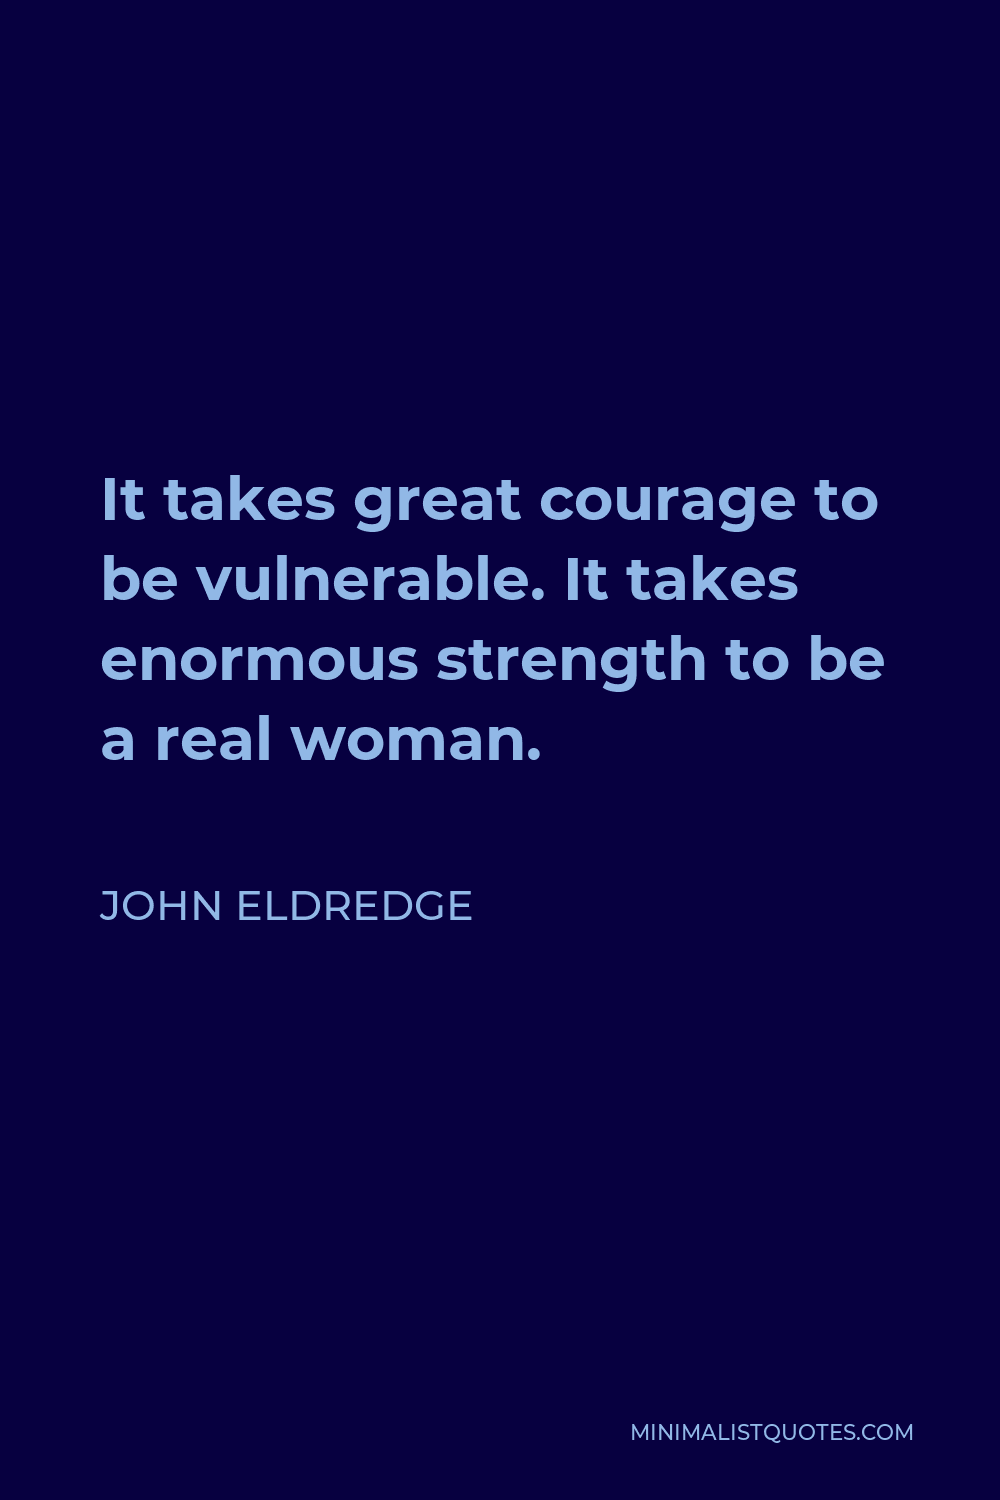 John Eldredge Quote: It takes great courage to be vulnerable. It